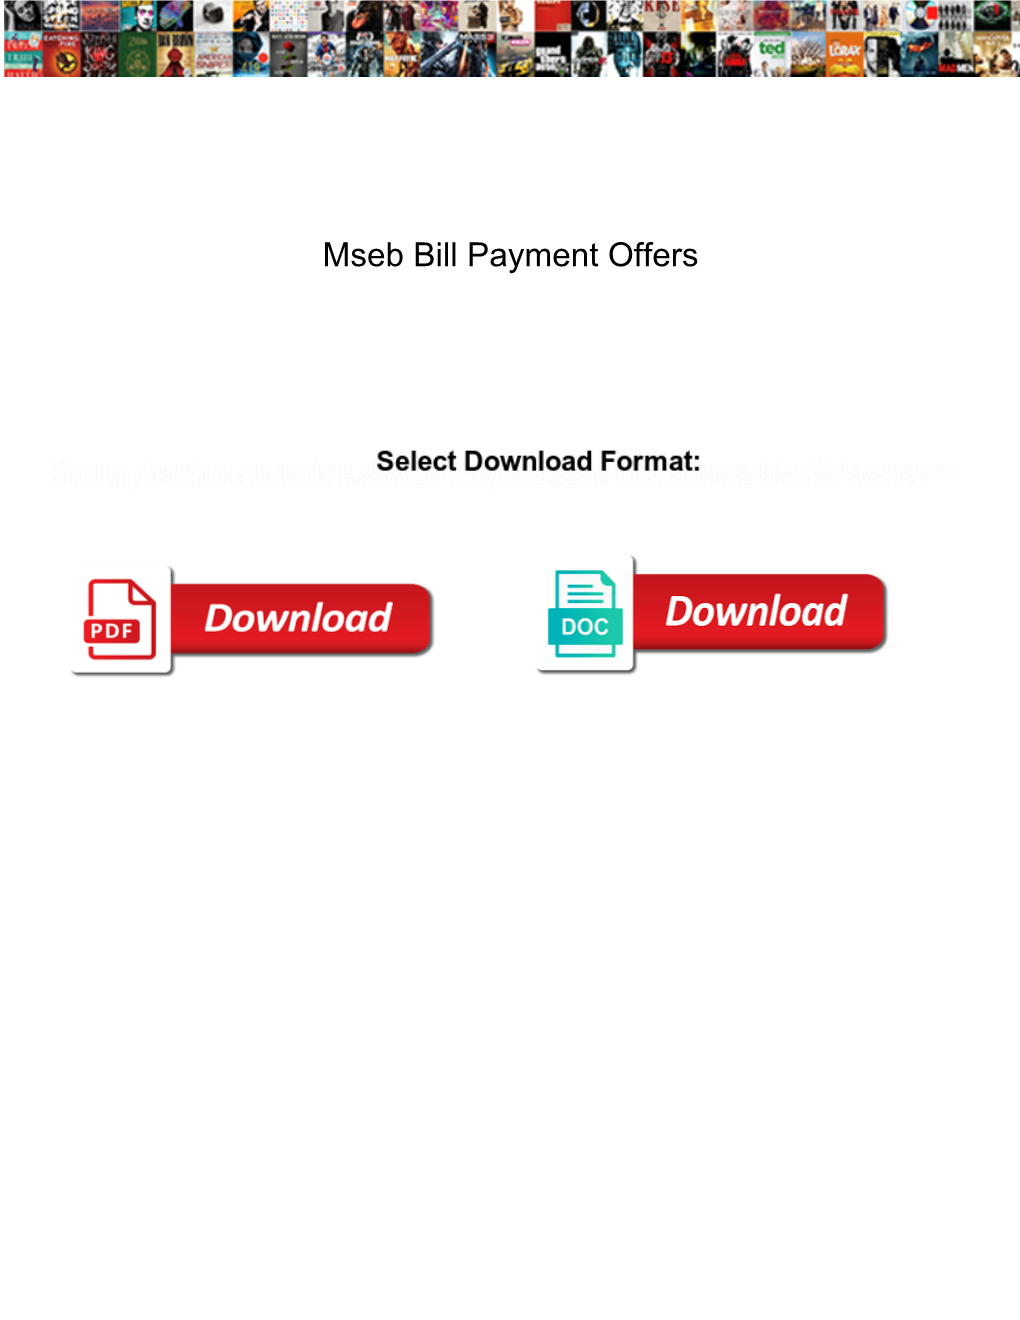 Mseb Bill Payment Offers